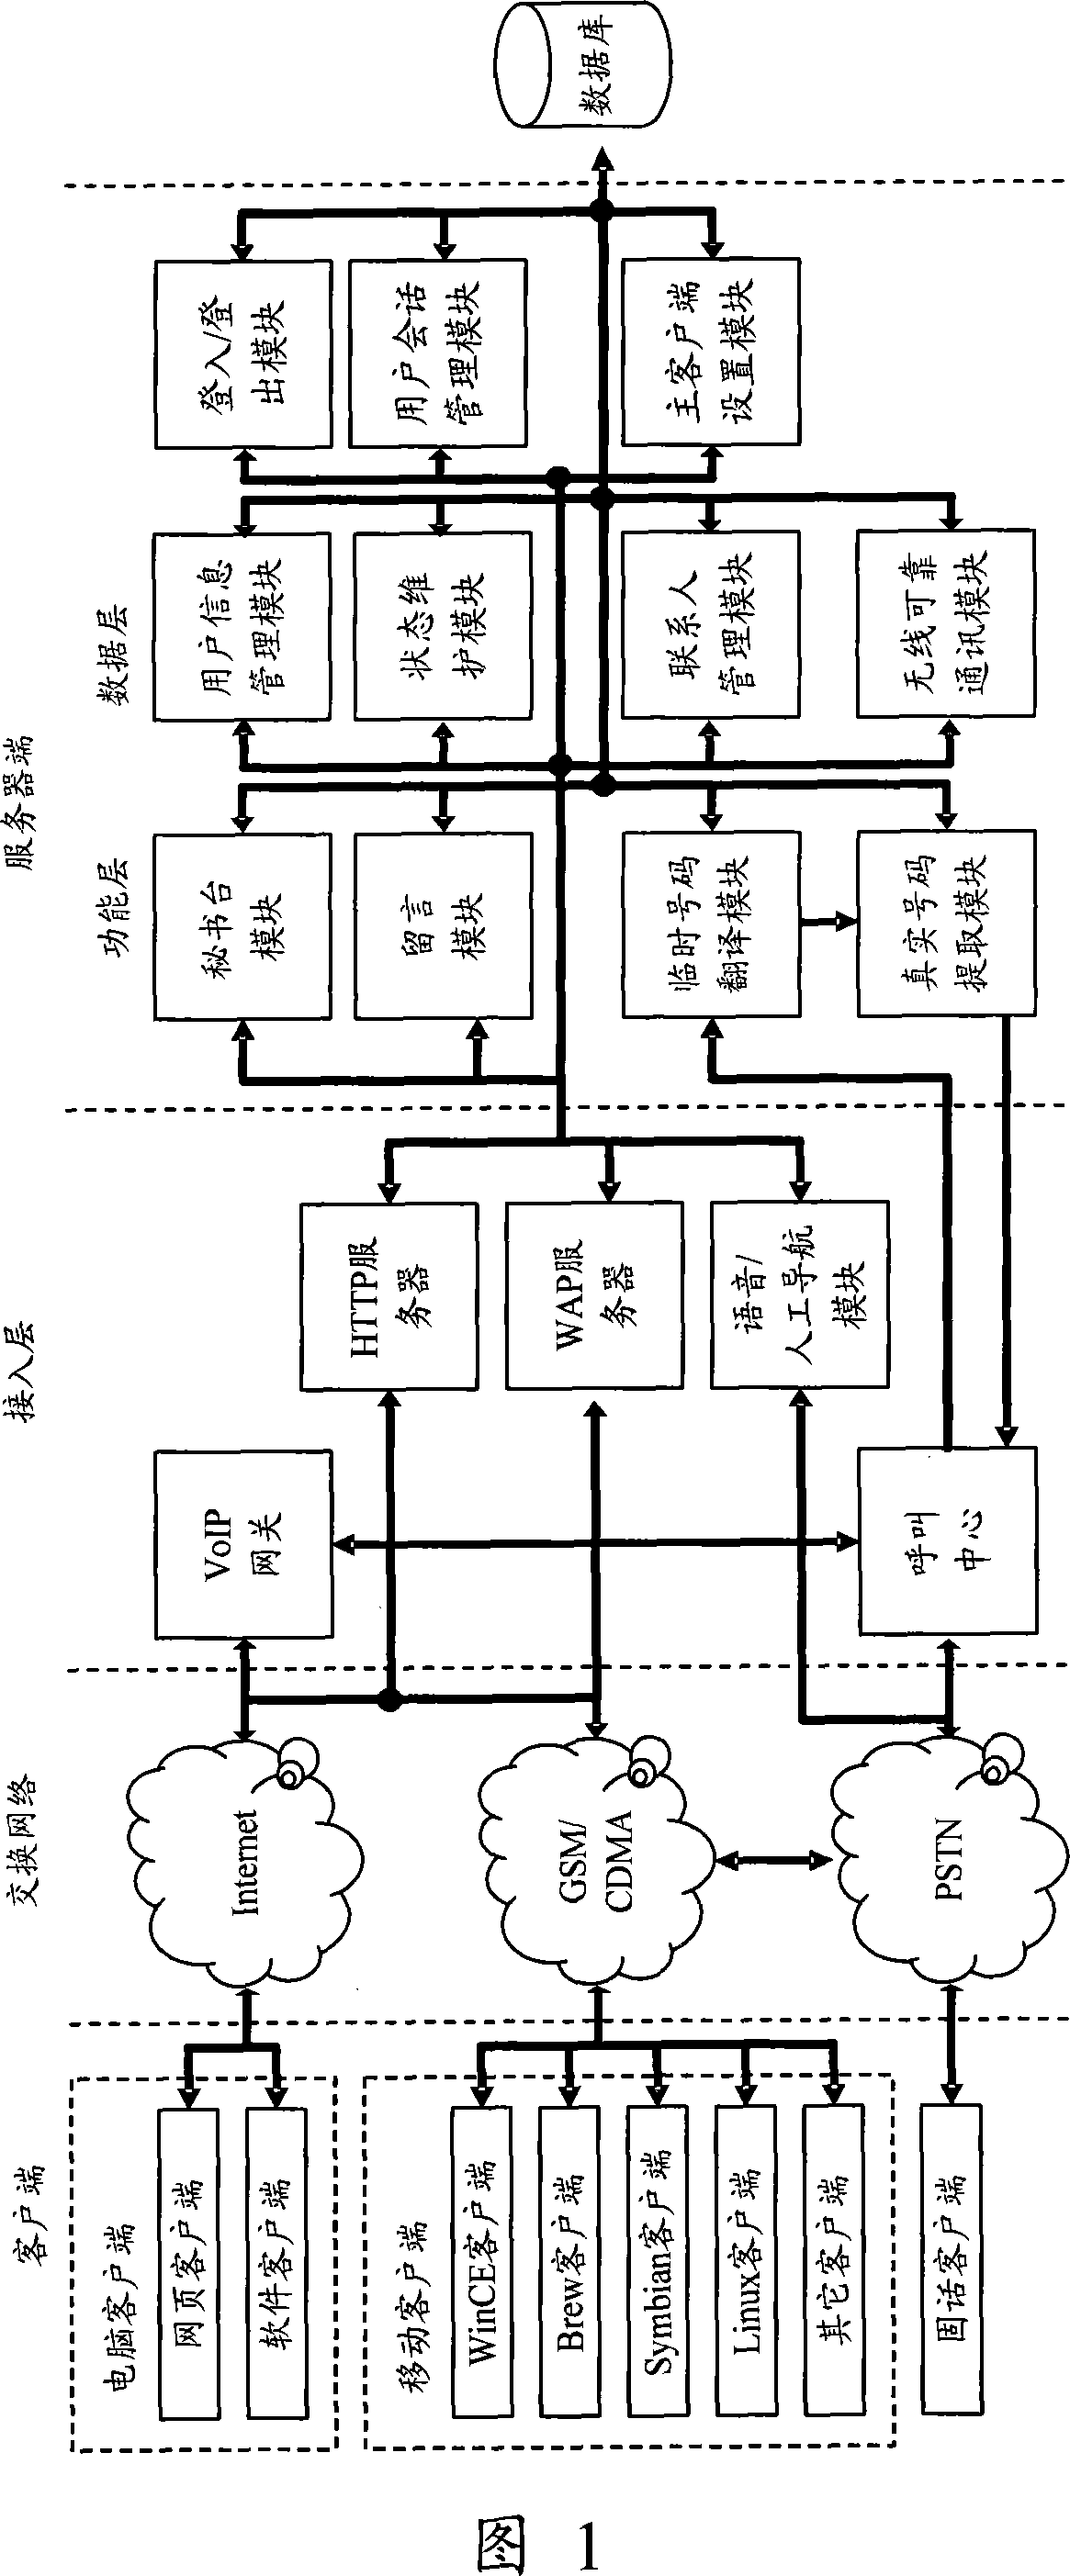 System for multimedia communication based on virtual number